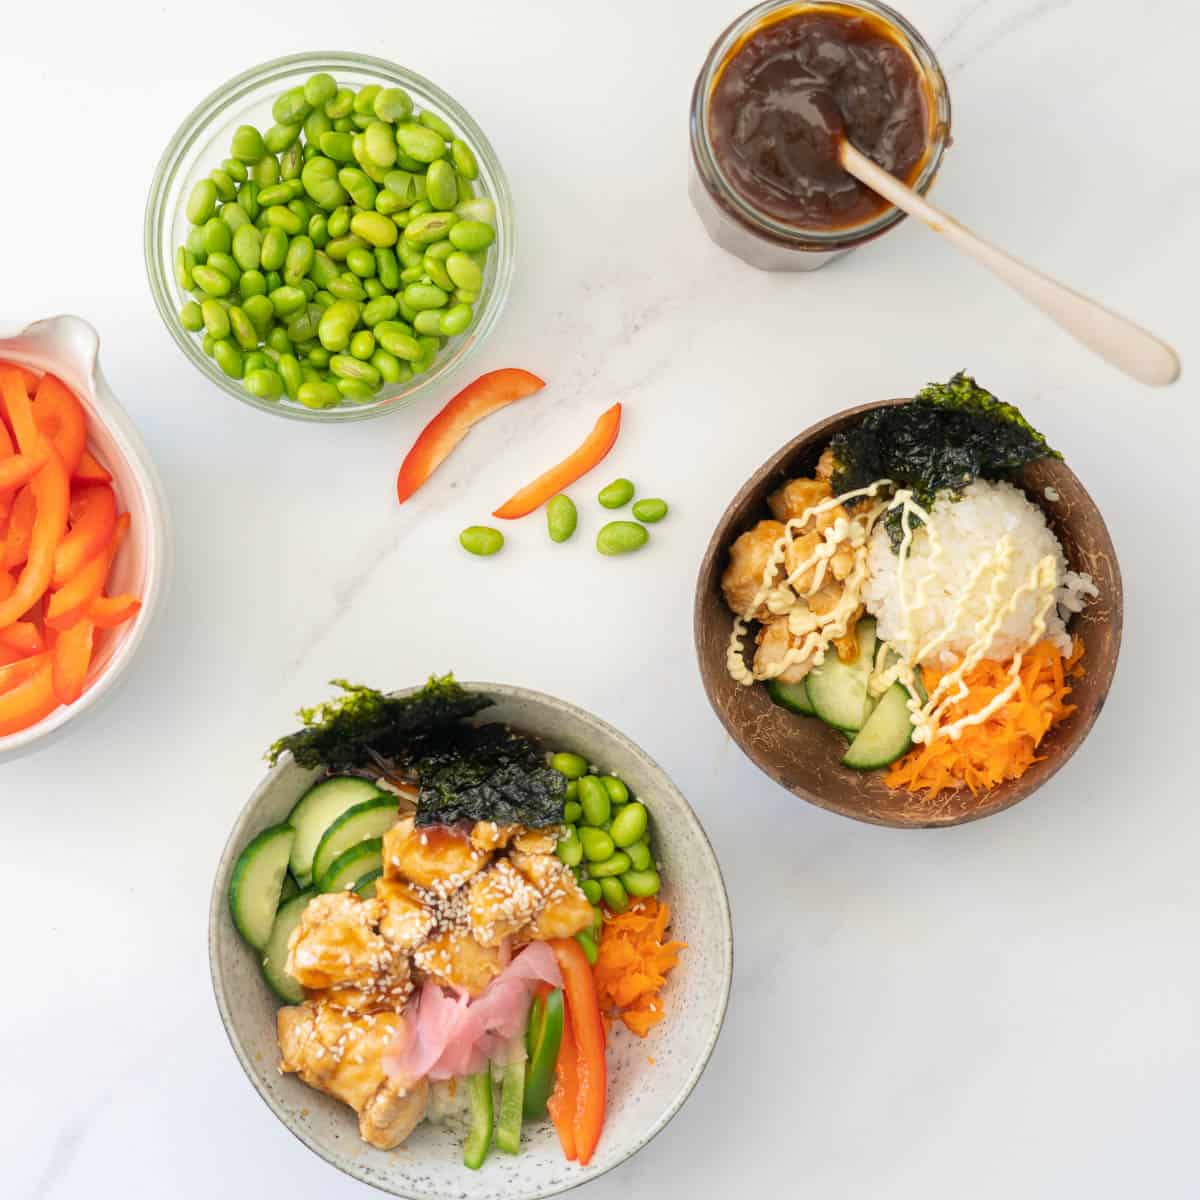 Two sushi bowls sitting on a table with a bowl of teriyaki sauce and edamame beans.